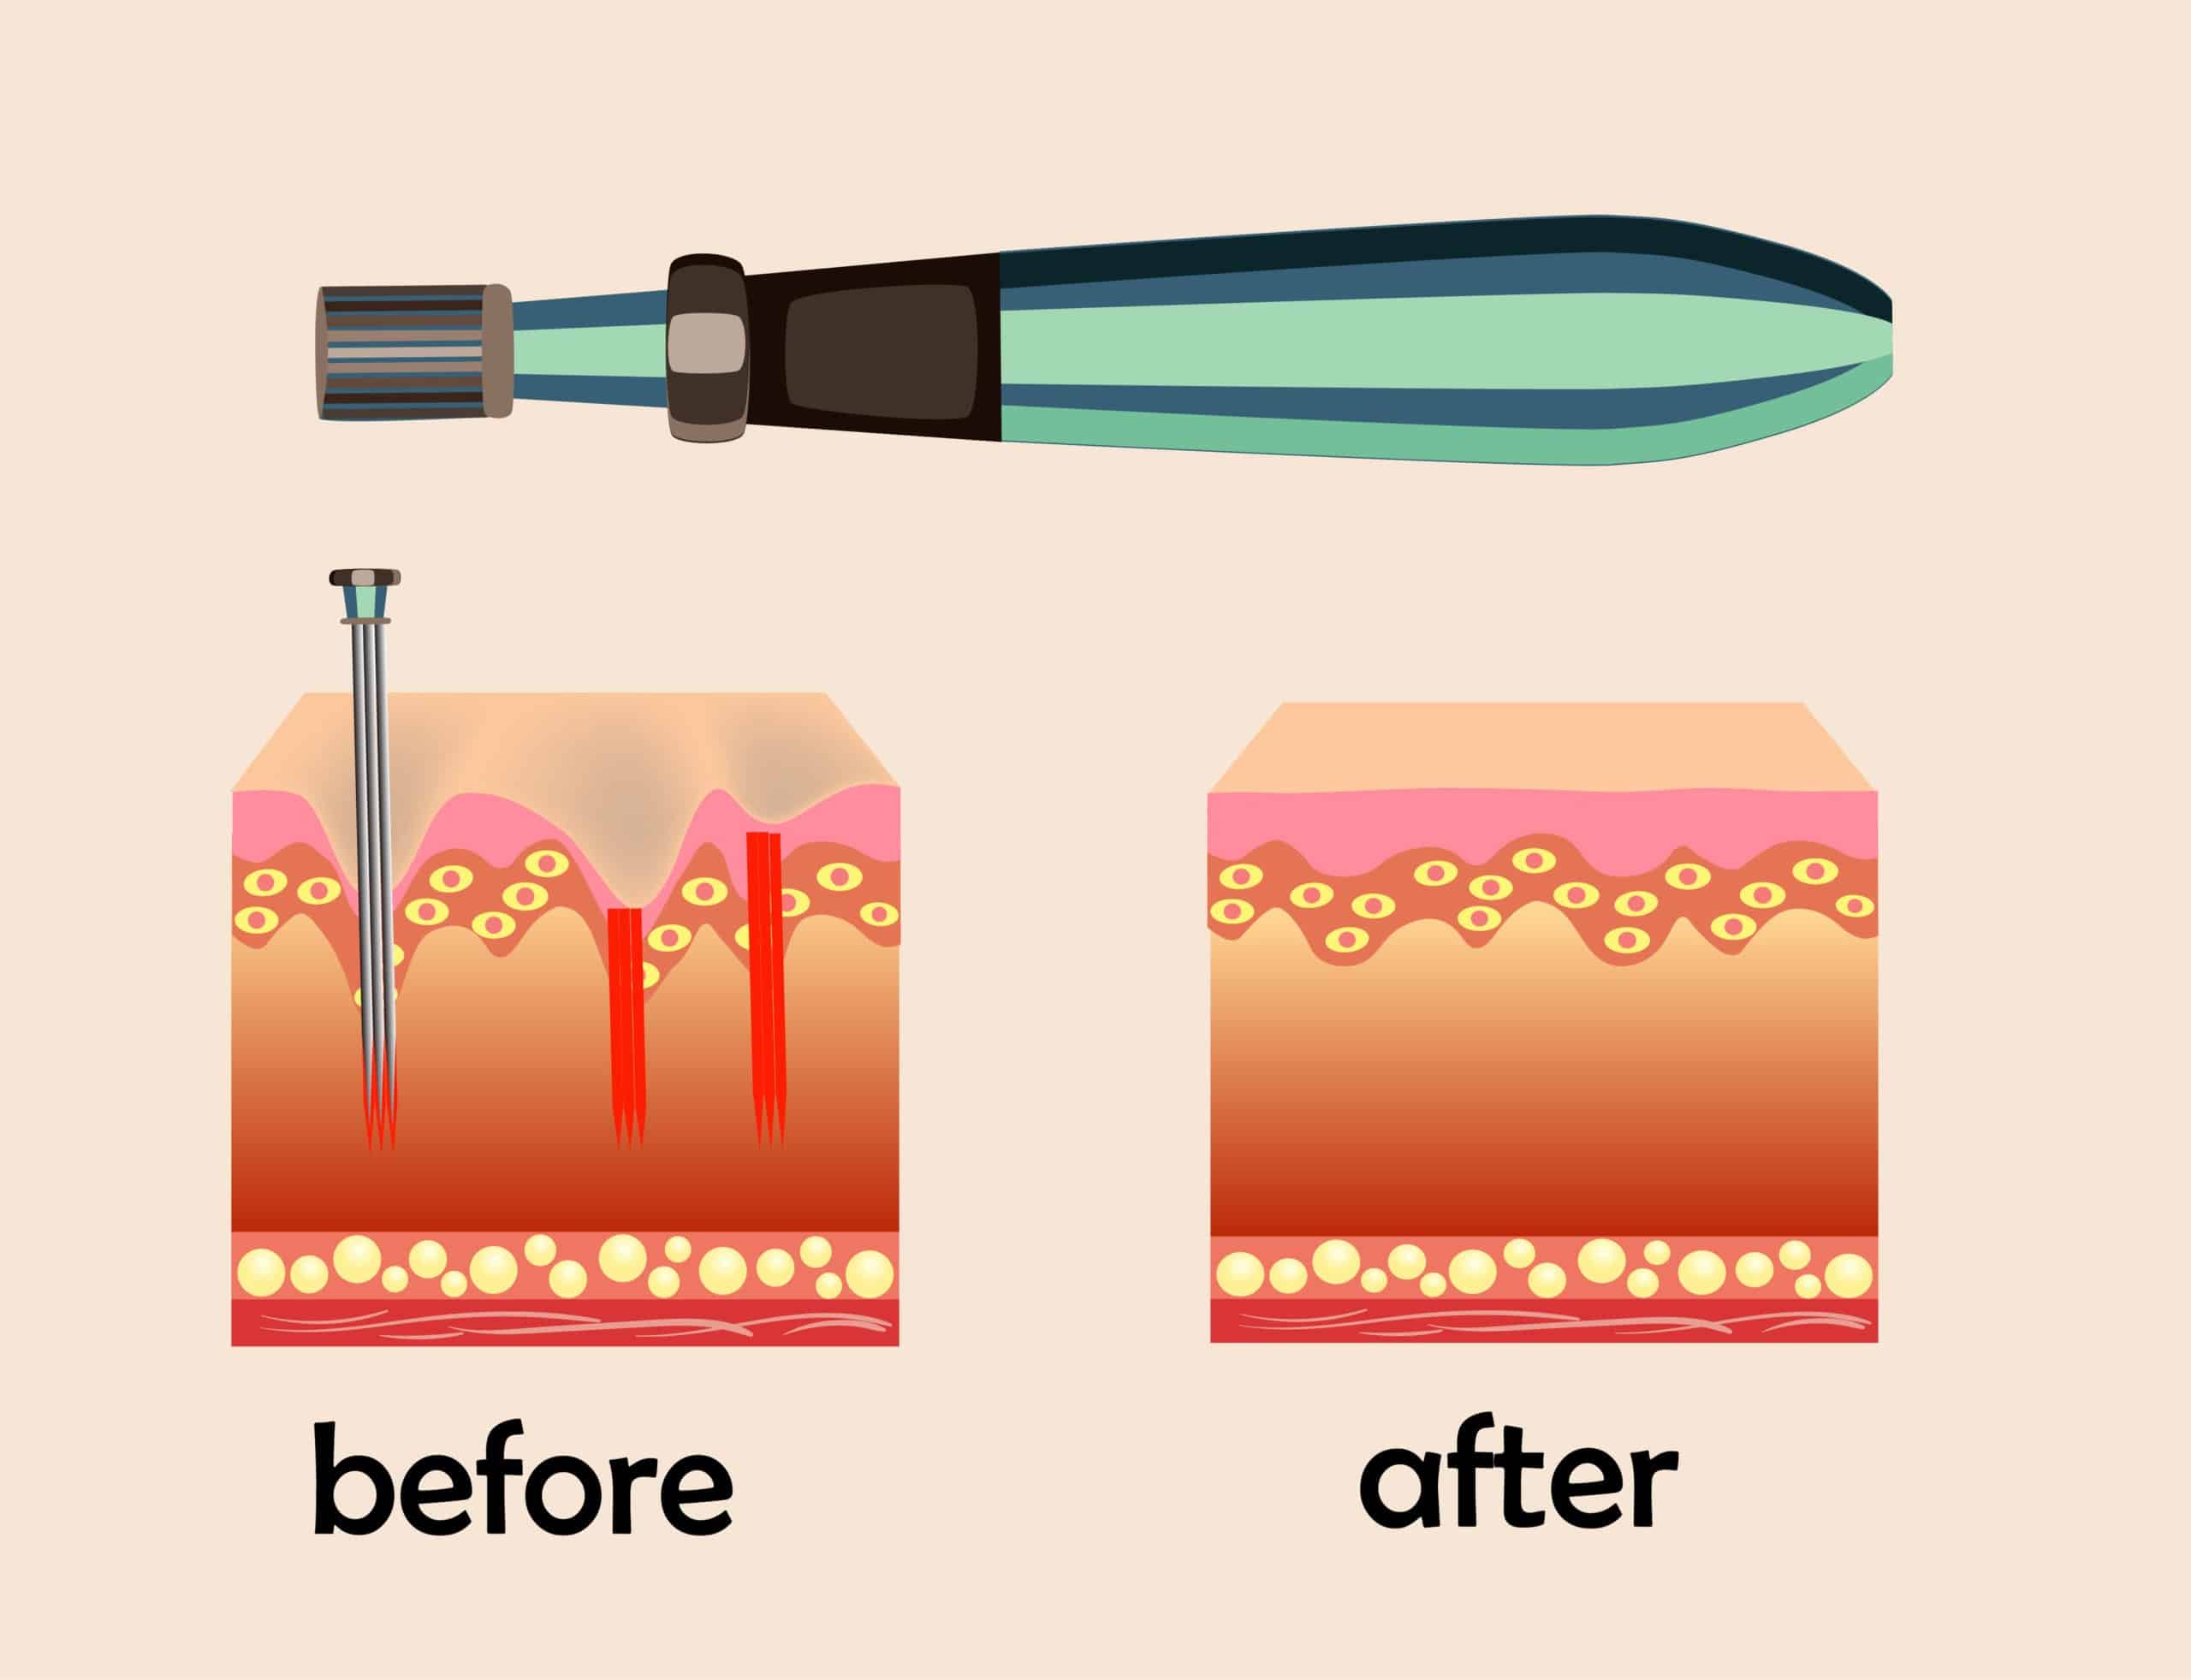 Before after effect, Microneedle stamping device, Collagen induction therapy | Cloud 9 MedSpa in Casa Grande, AZ